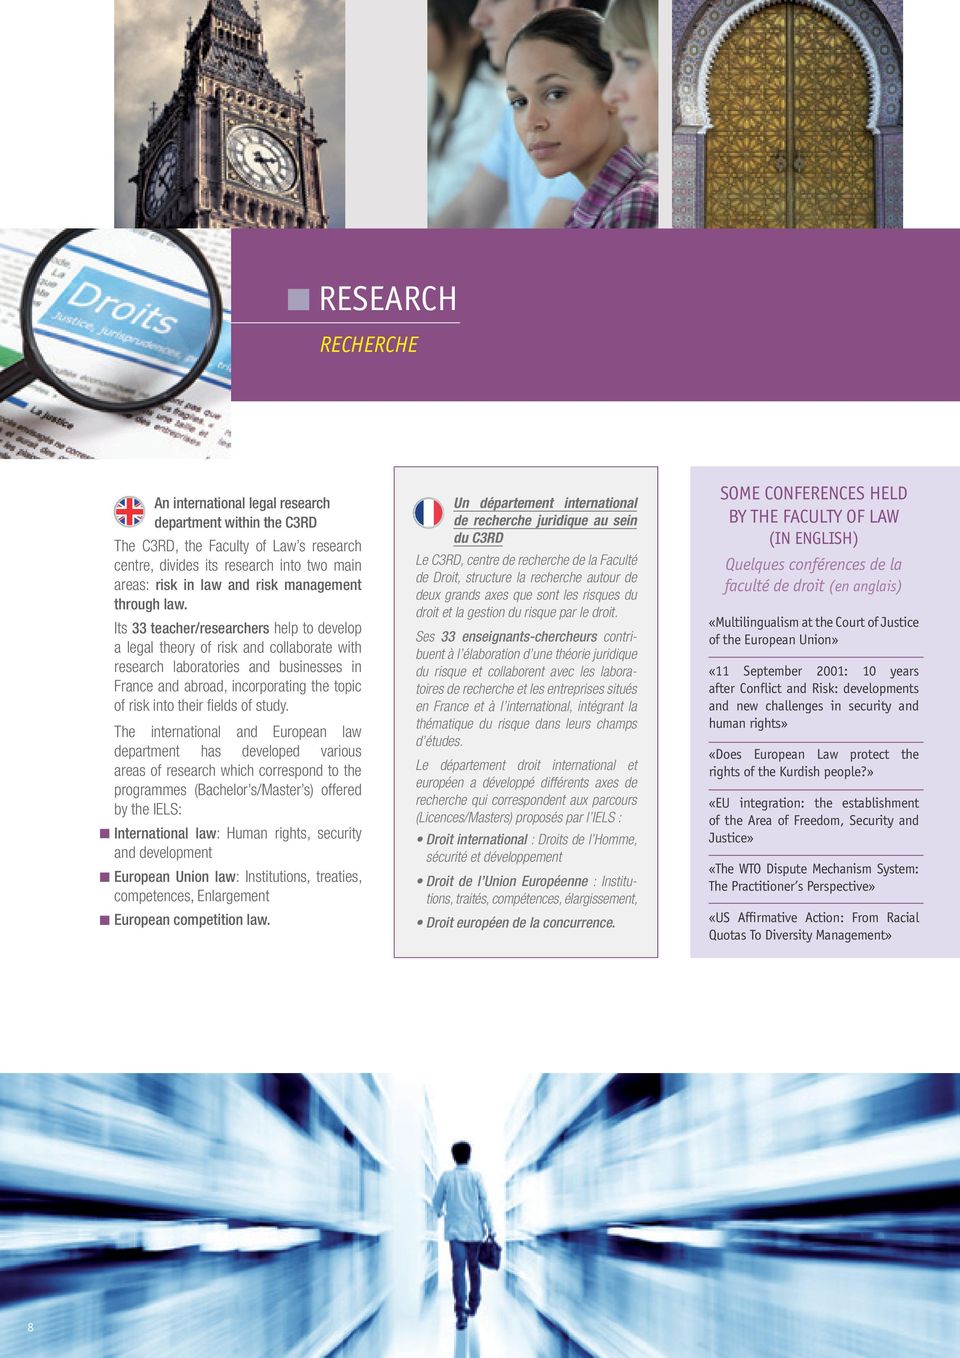 Its 33 teacher/researchers help to develop a legal theory of risk and collaborate with research laboratories and businesses in France and abroad, incorporating the topic of risk into their fi elds of